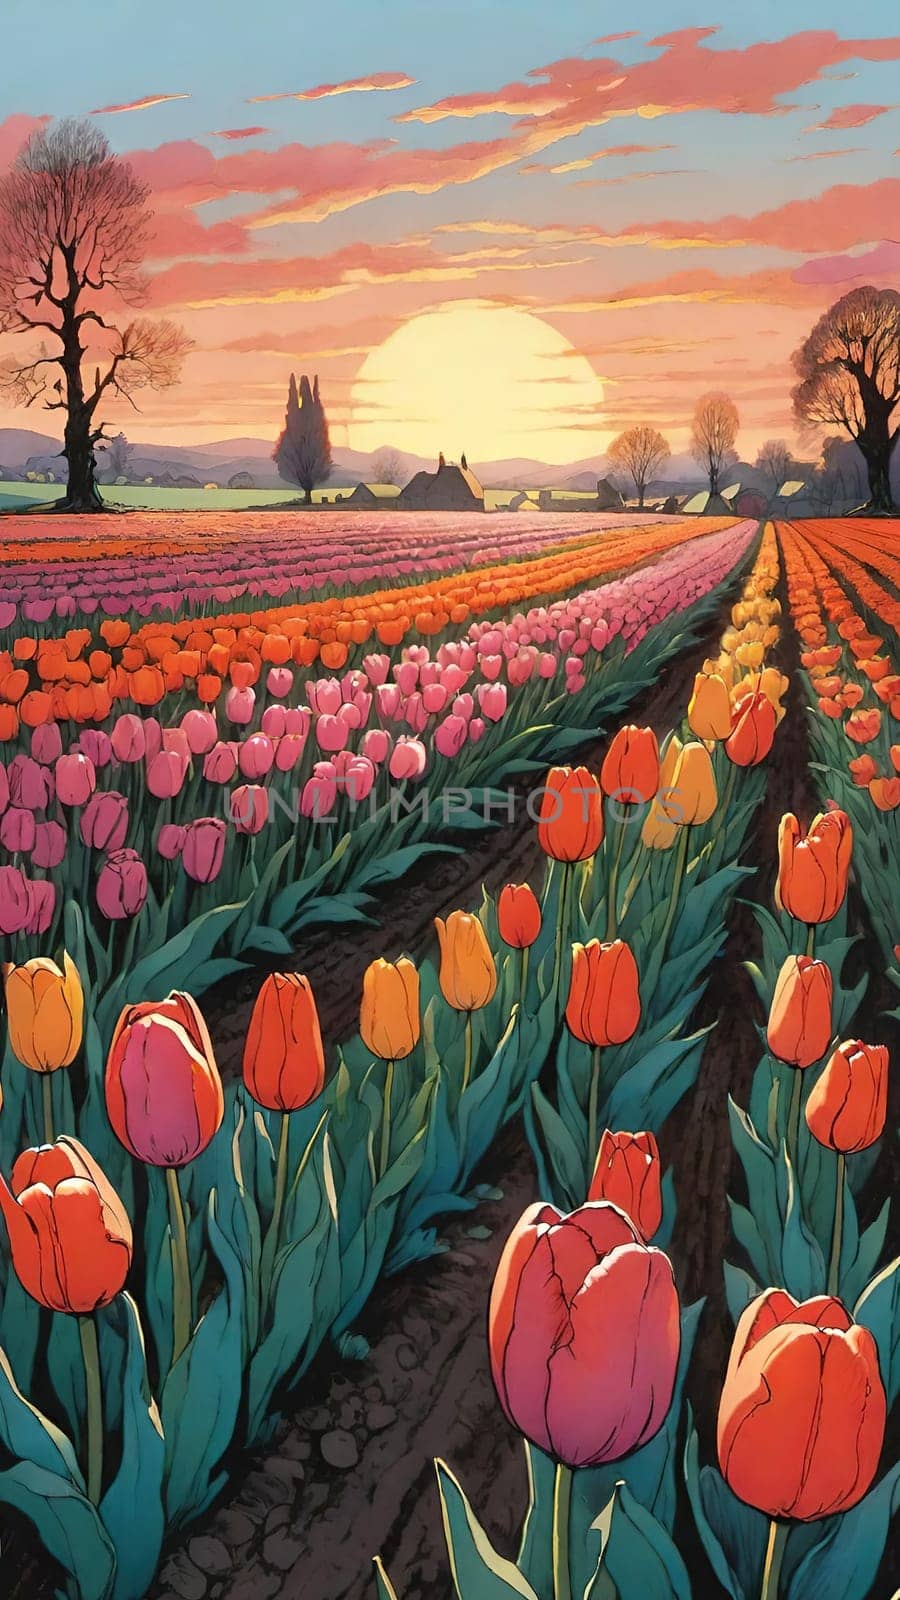 Tulip field at sunset, Colorful background. Wallpaper.Vertica image. by yilmazsavaskandag